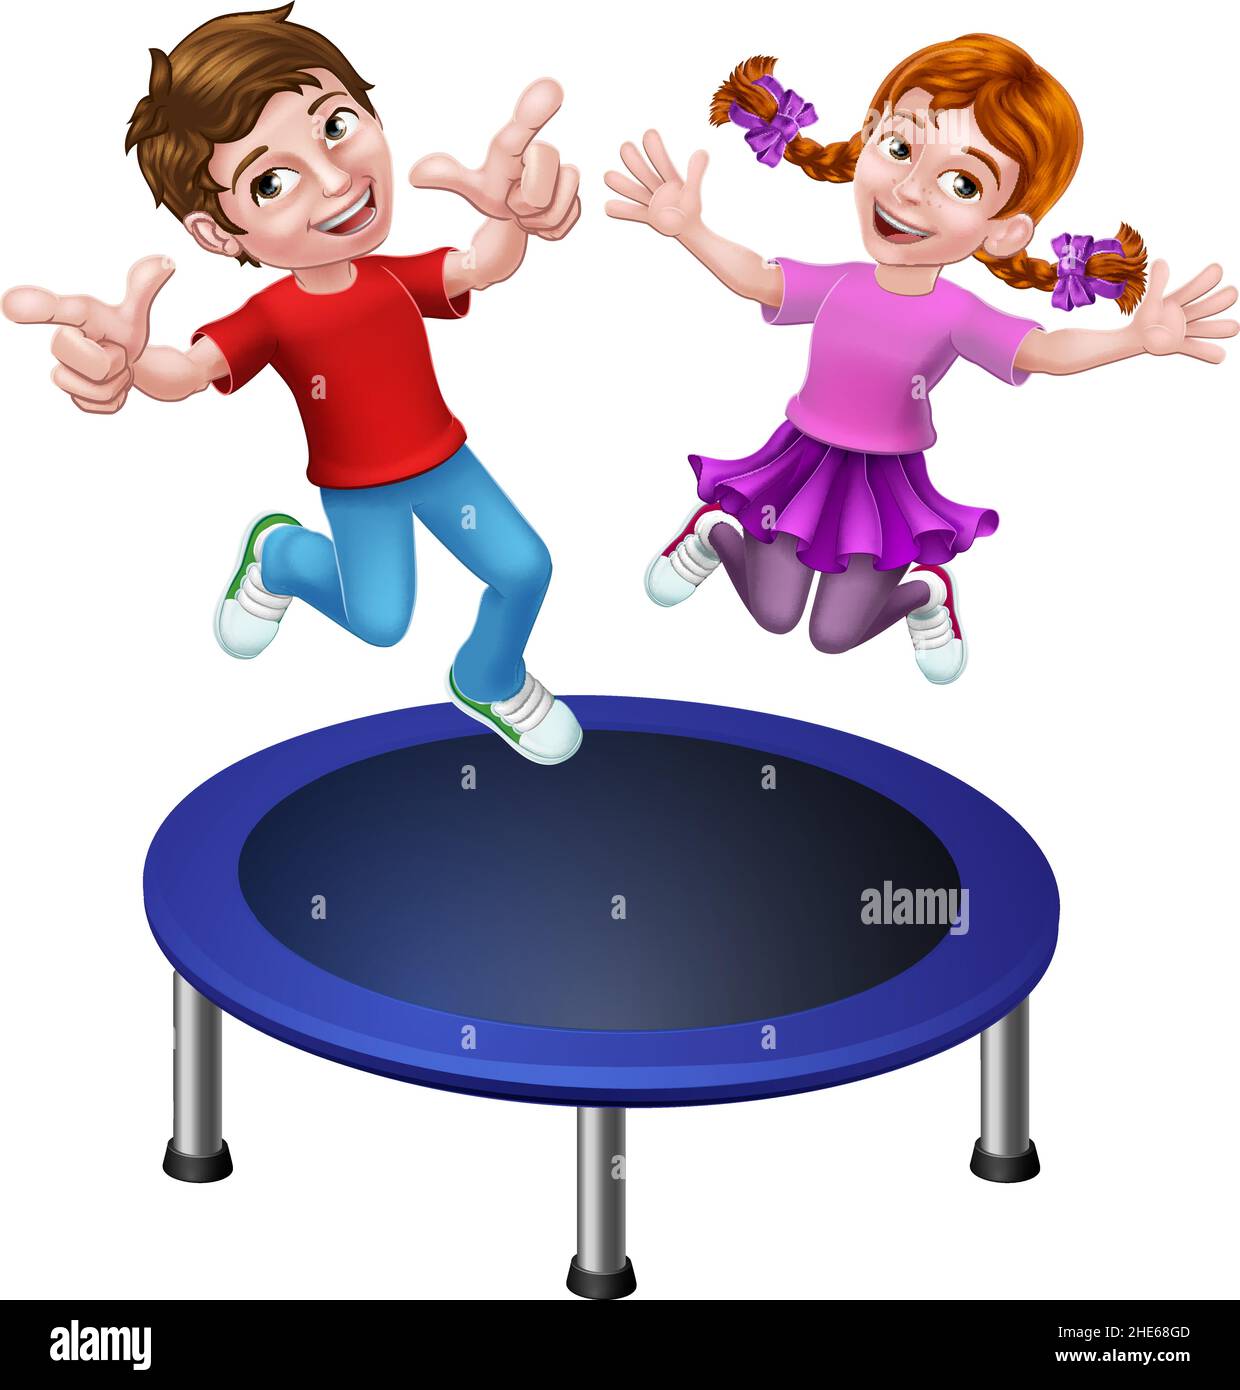 Kids Jumping On A Round Cartoon Trampoline Stock Vector